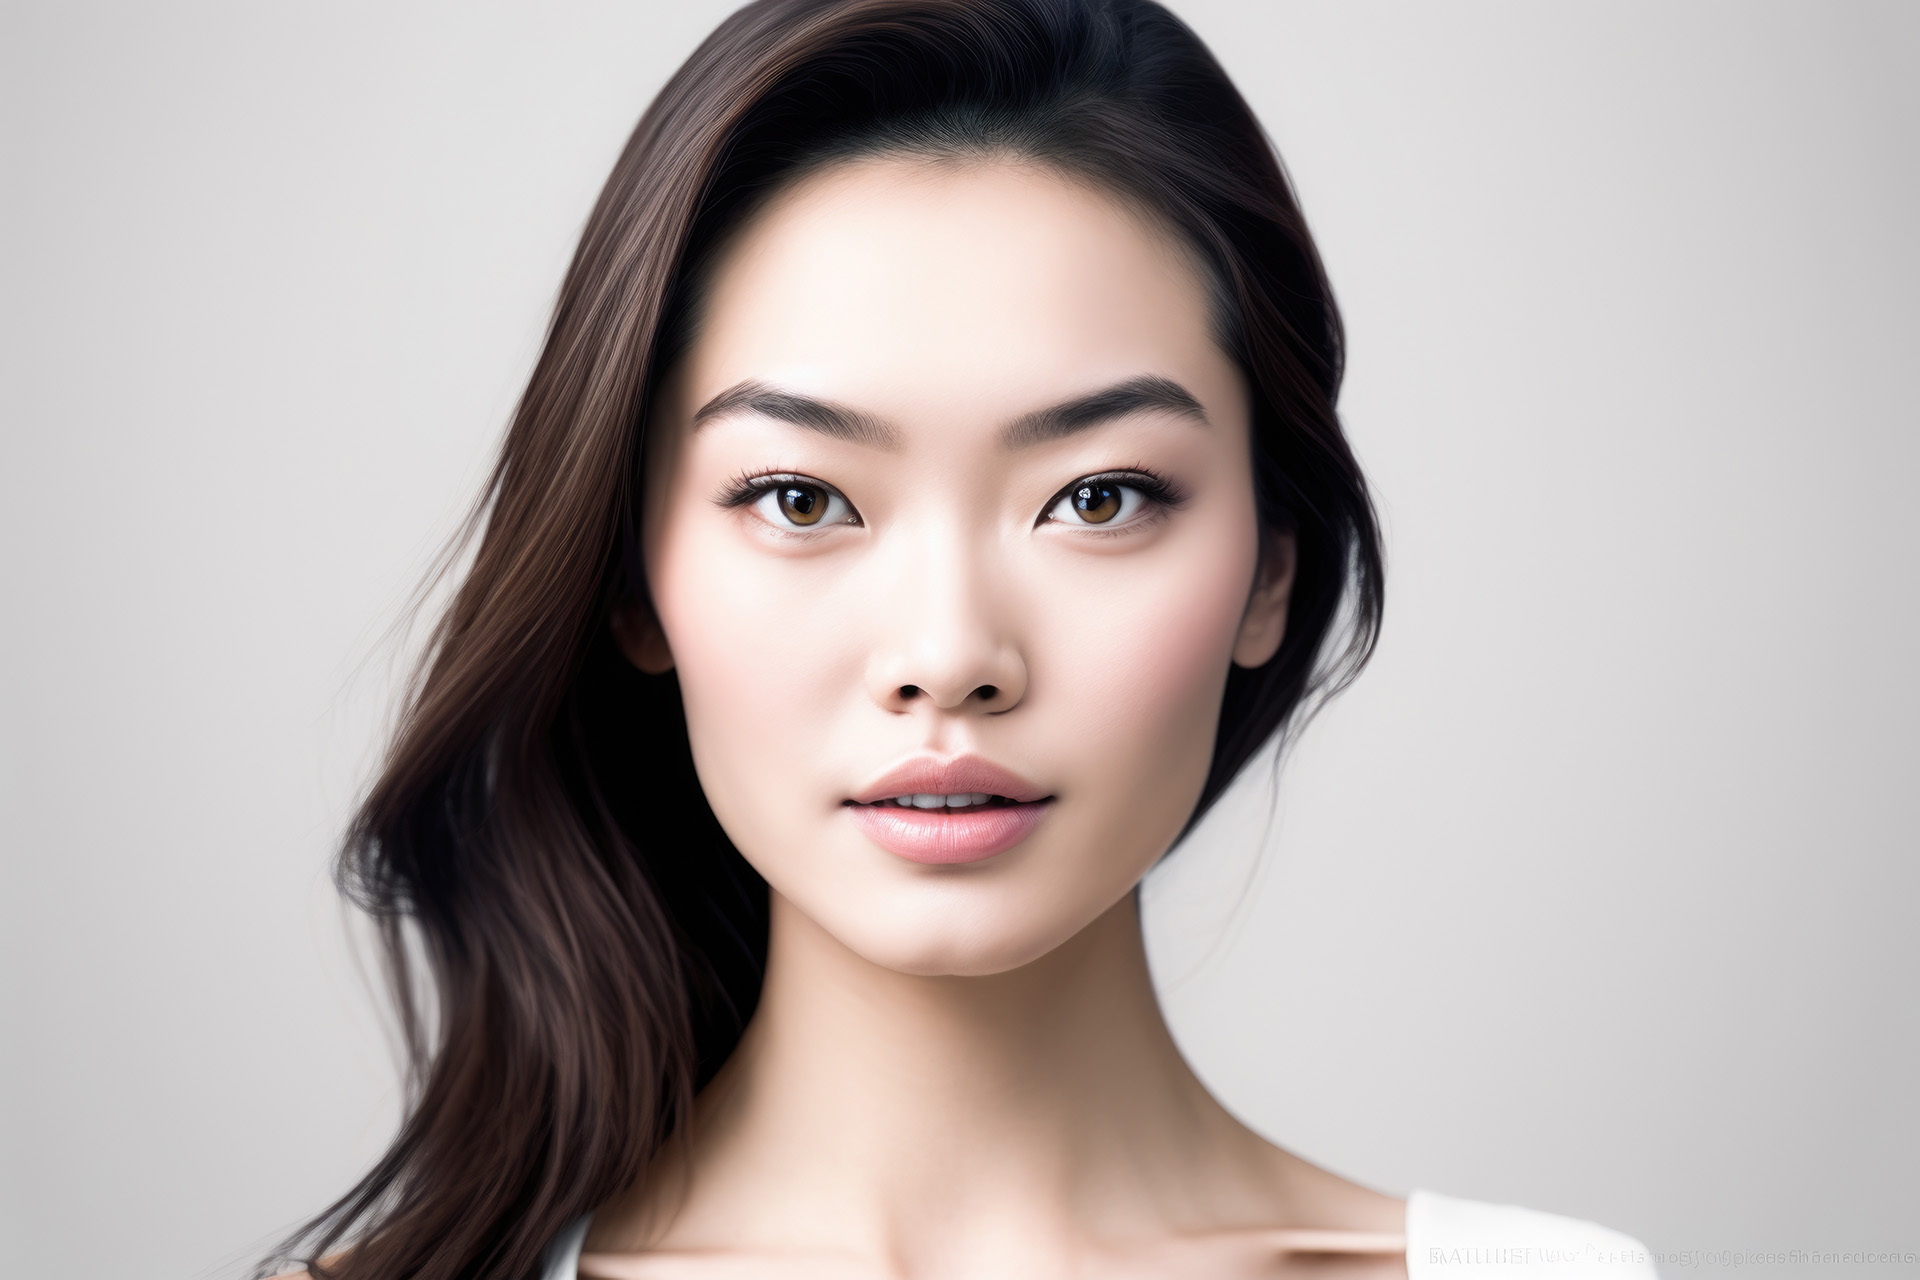 What Plastic Surgery Procedure is Popular in China?